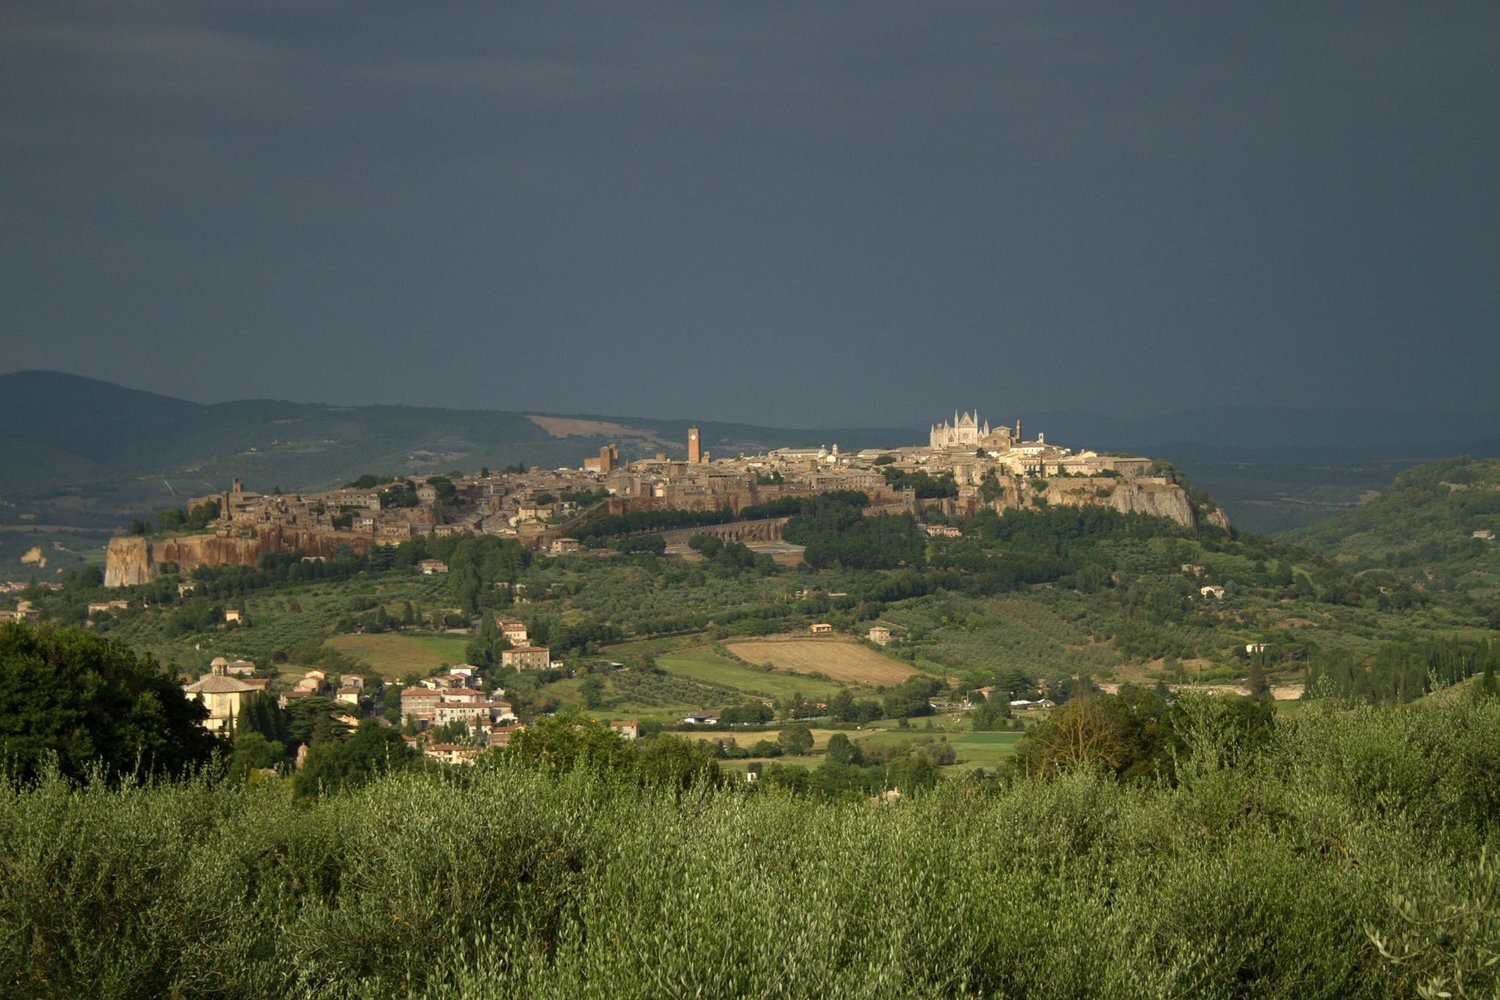  Photographer Emily Burlew caught this dramatic view as the dark clouds gathered over the still sunny Orvieto. 